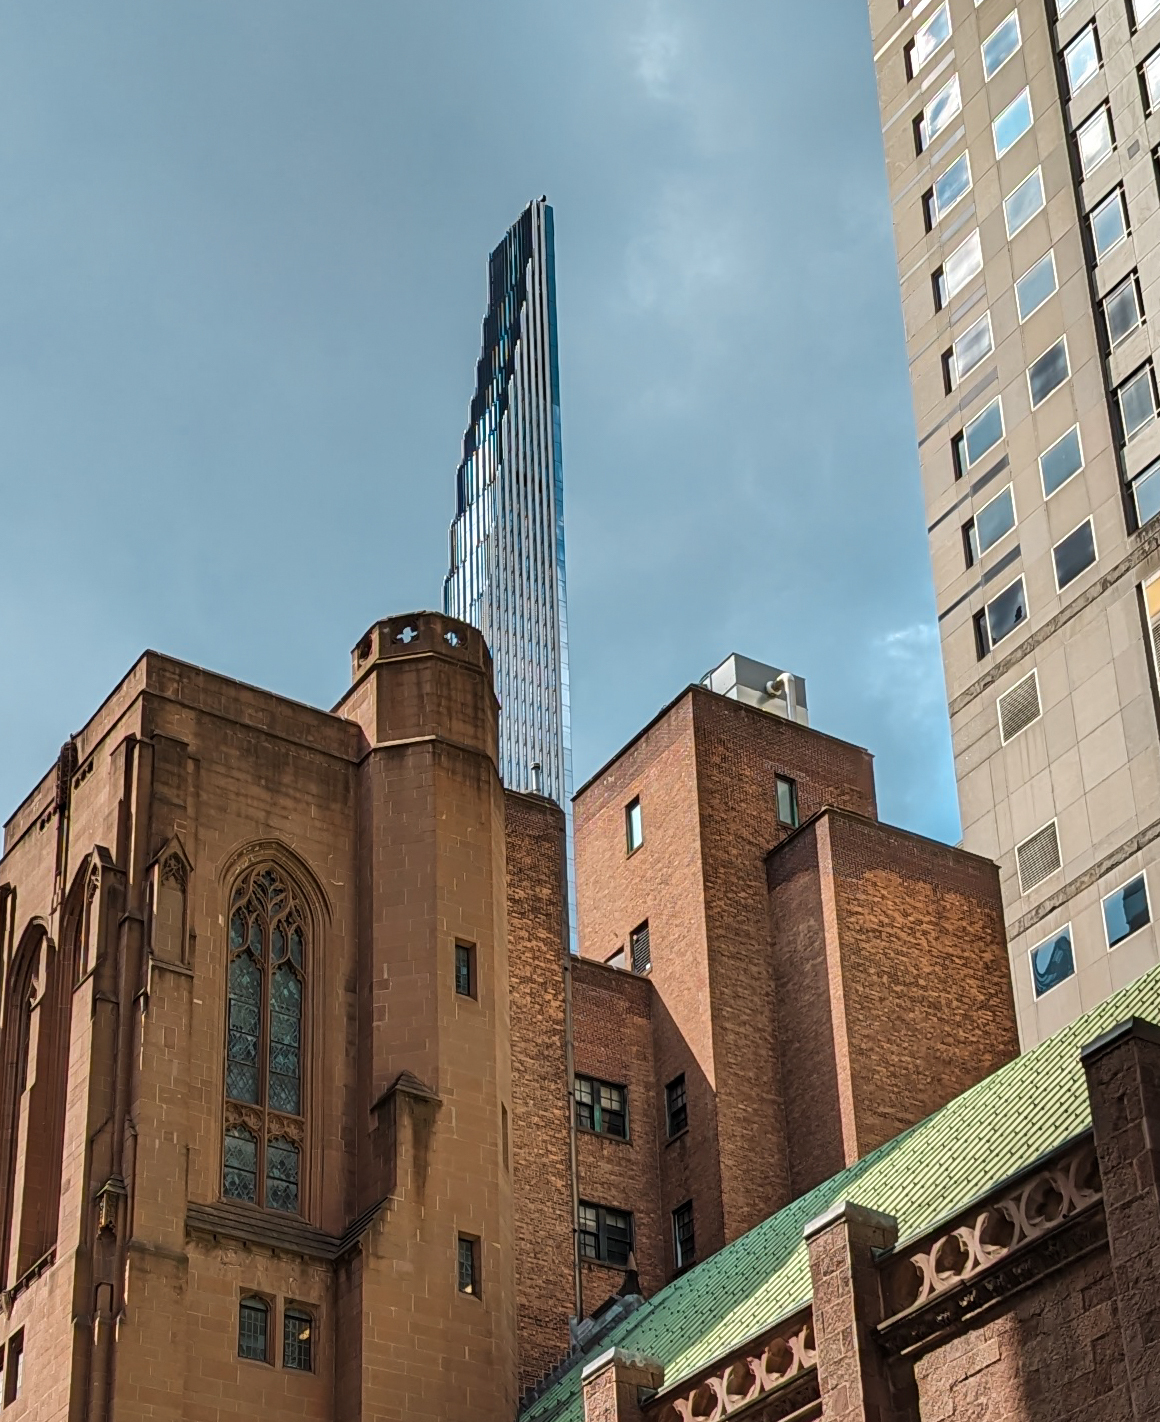 Steinway Tower, a narrow glass supertall skyscraper in NYC. In the foreground, a wall of a cathedral